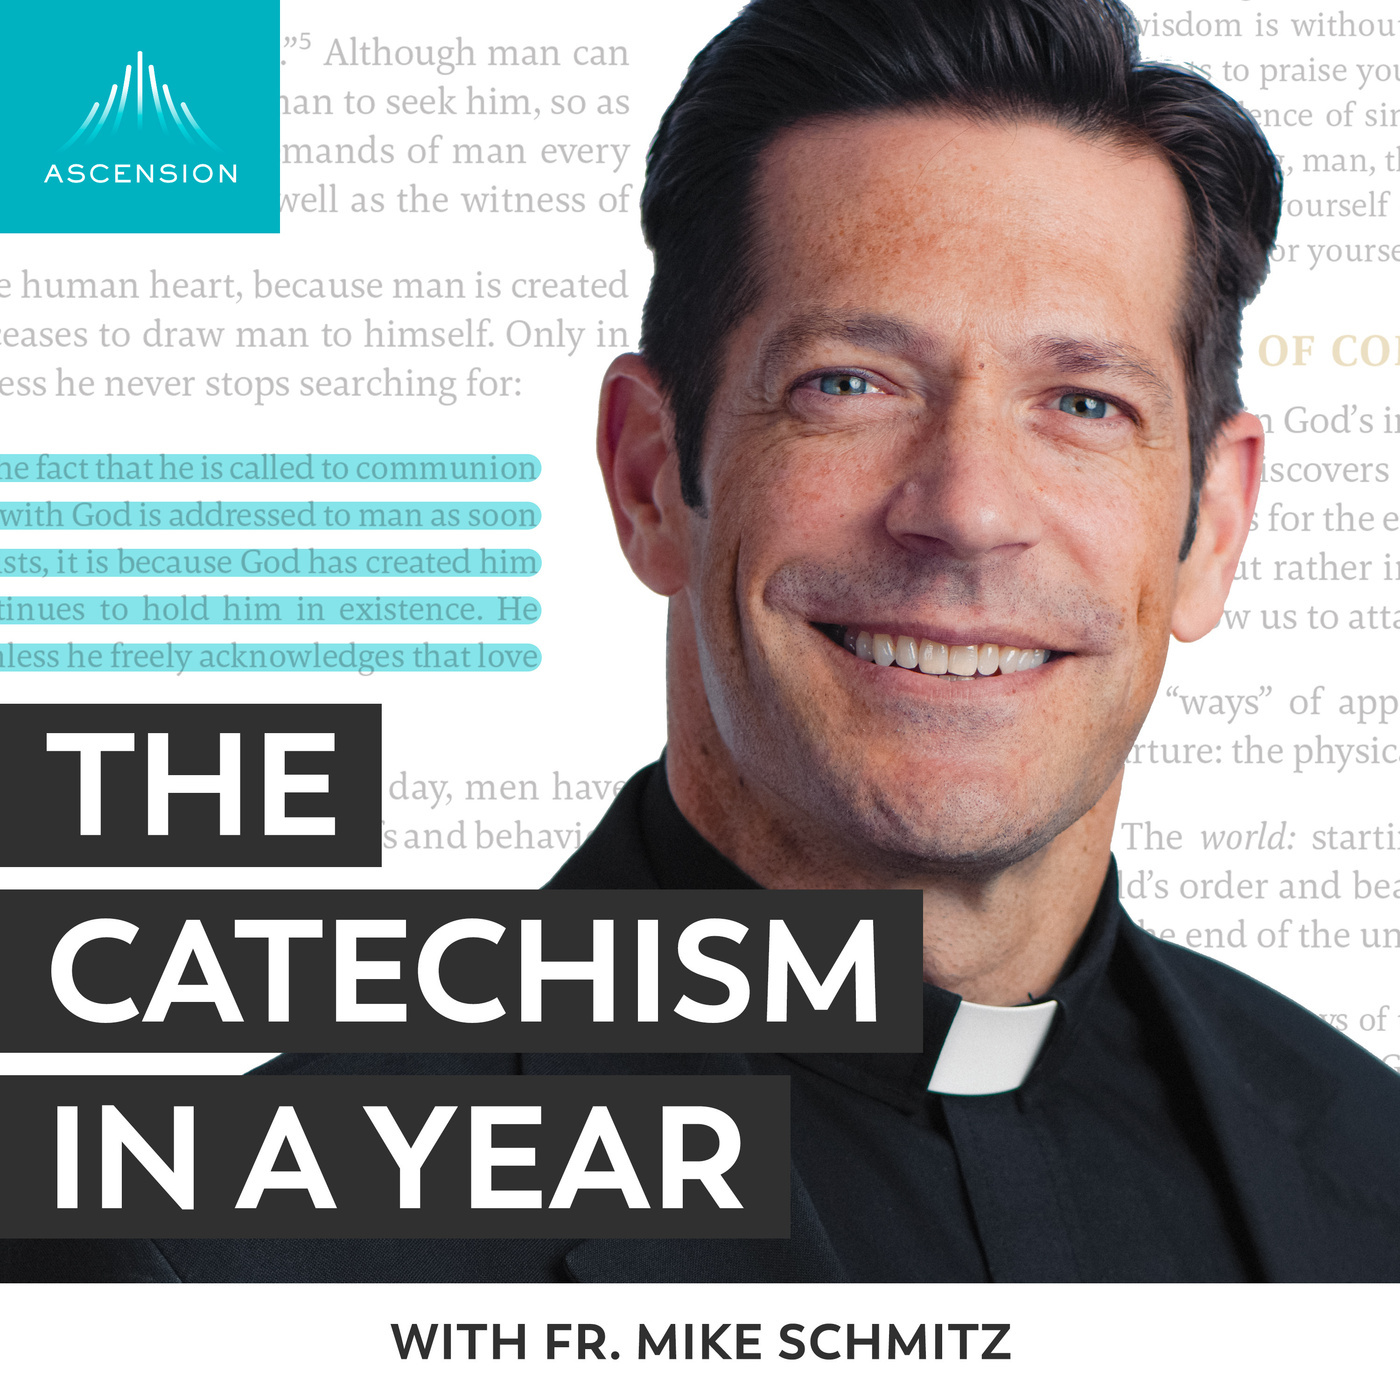 The Catechism in a Year (with Fr. Mike Schmitz): Day 337: Blessing, Adoration, and Petition